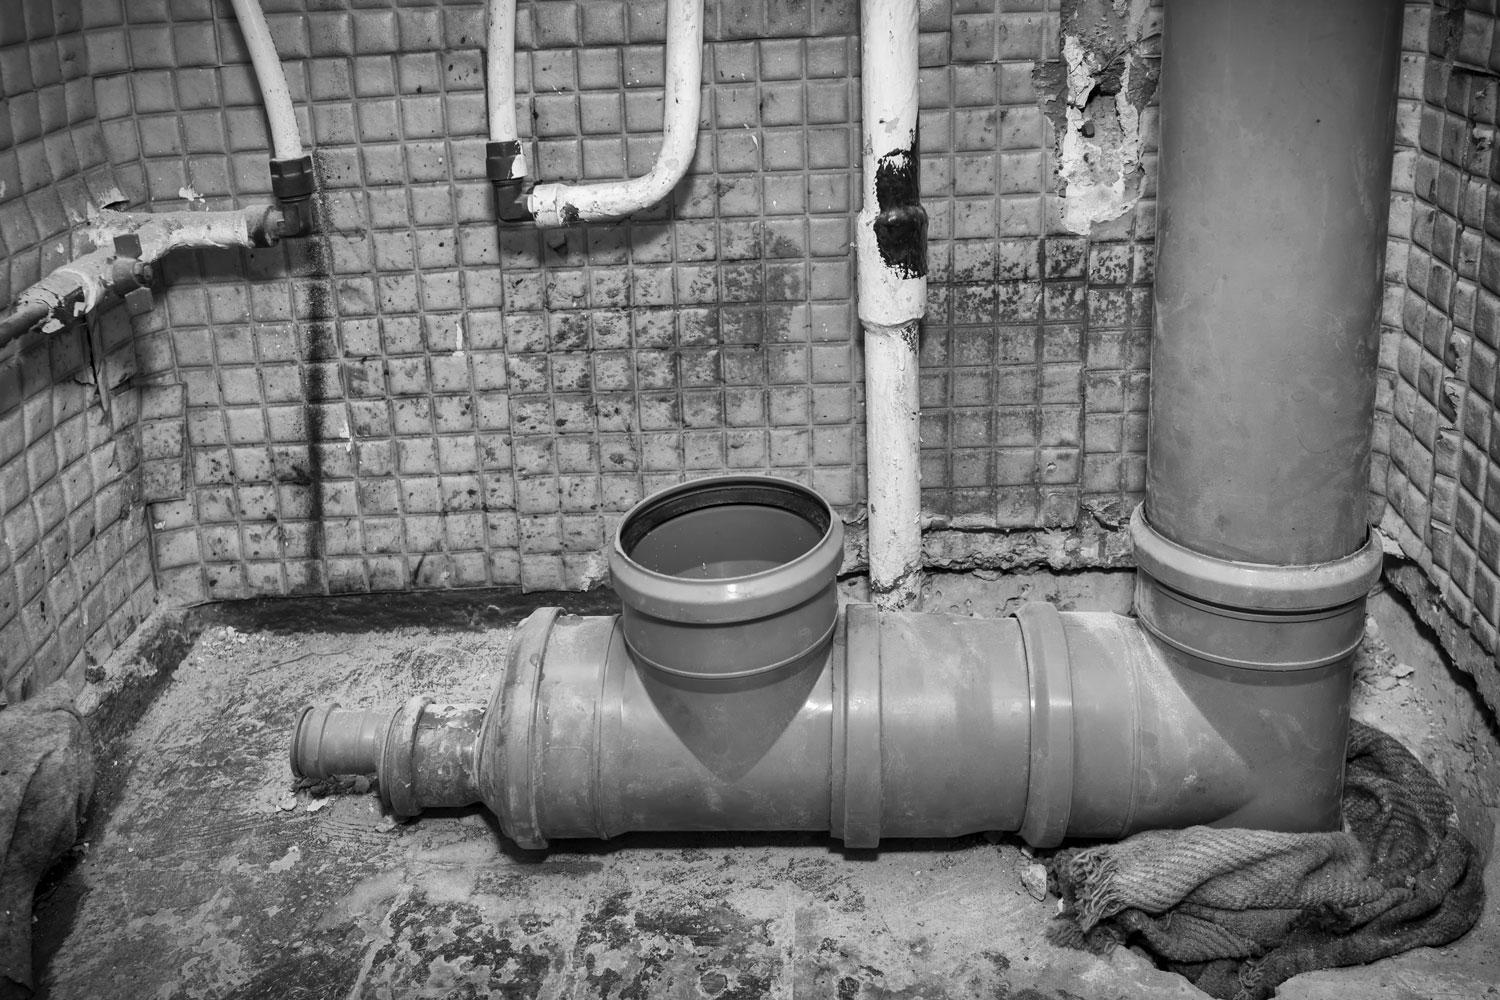 Toilet apartment in a multi-storey residential building in the city. Replacing an old iron sewer pipe with a new plastic one. Installation of the system. Black and white photography 